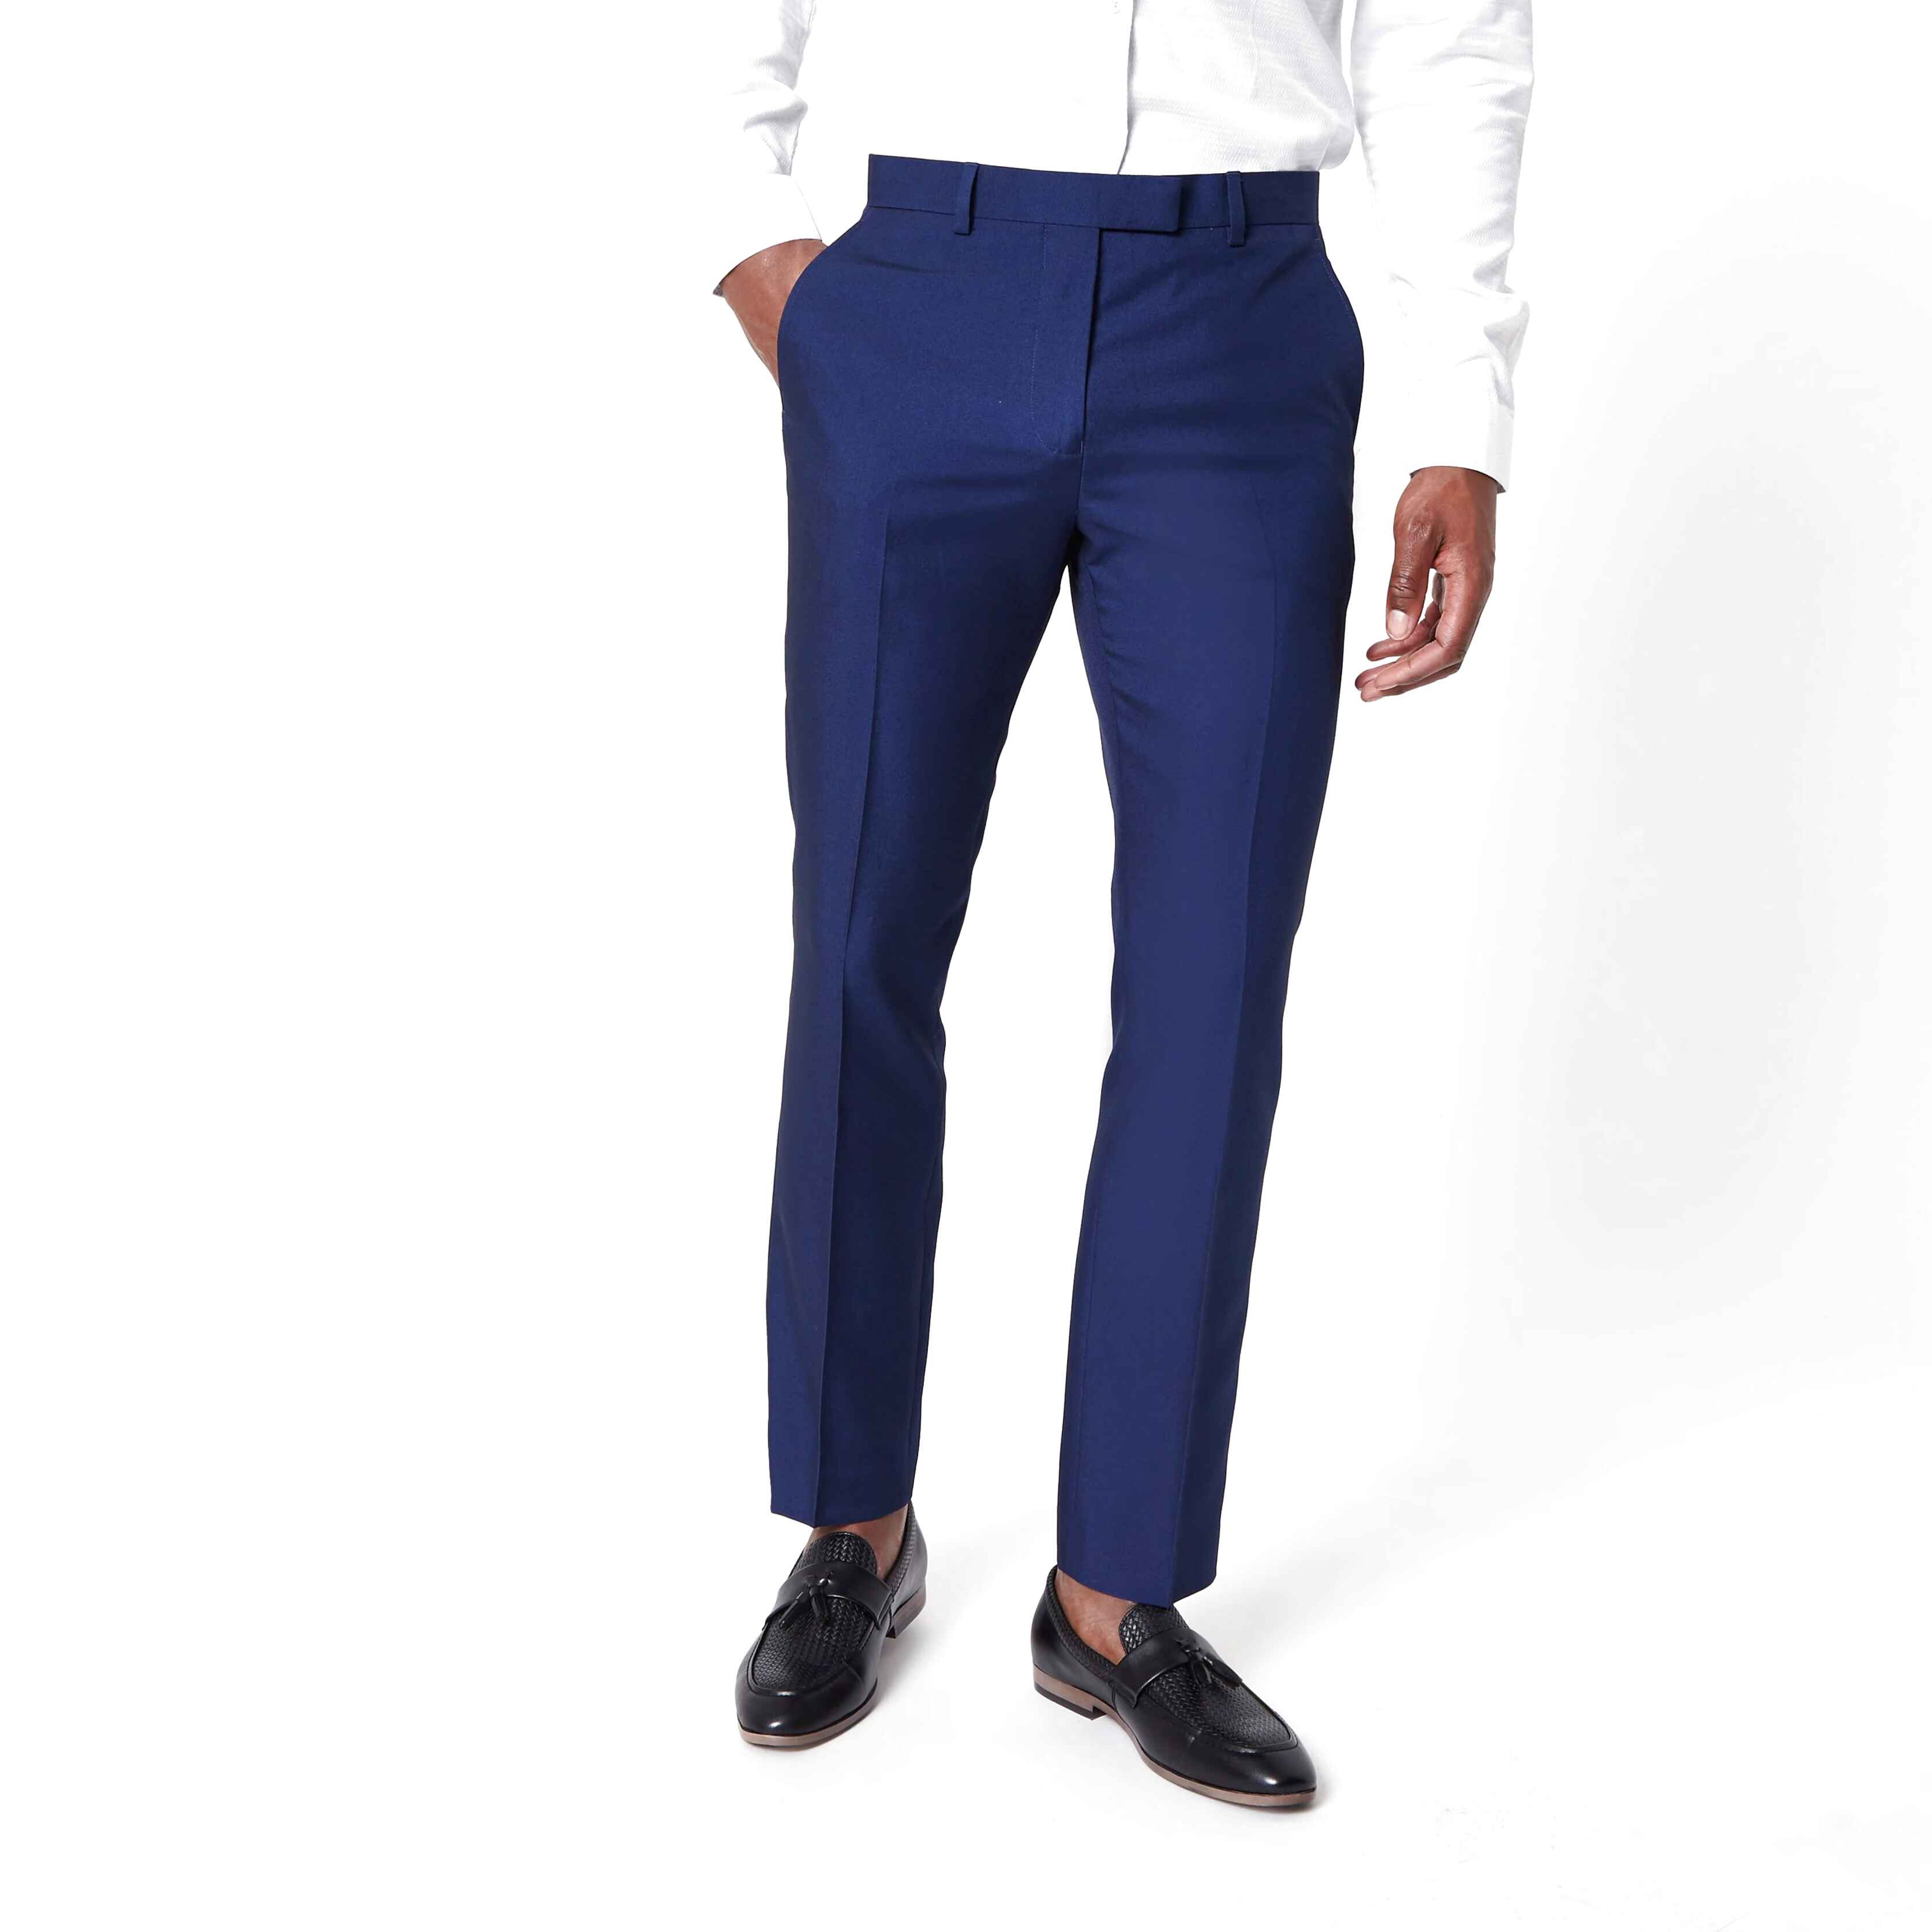 Mens Bright Trousers for sale in UK | 60 used Mens Bright Trousers